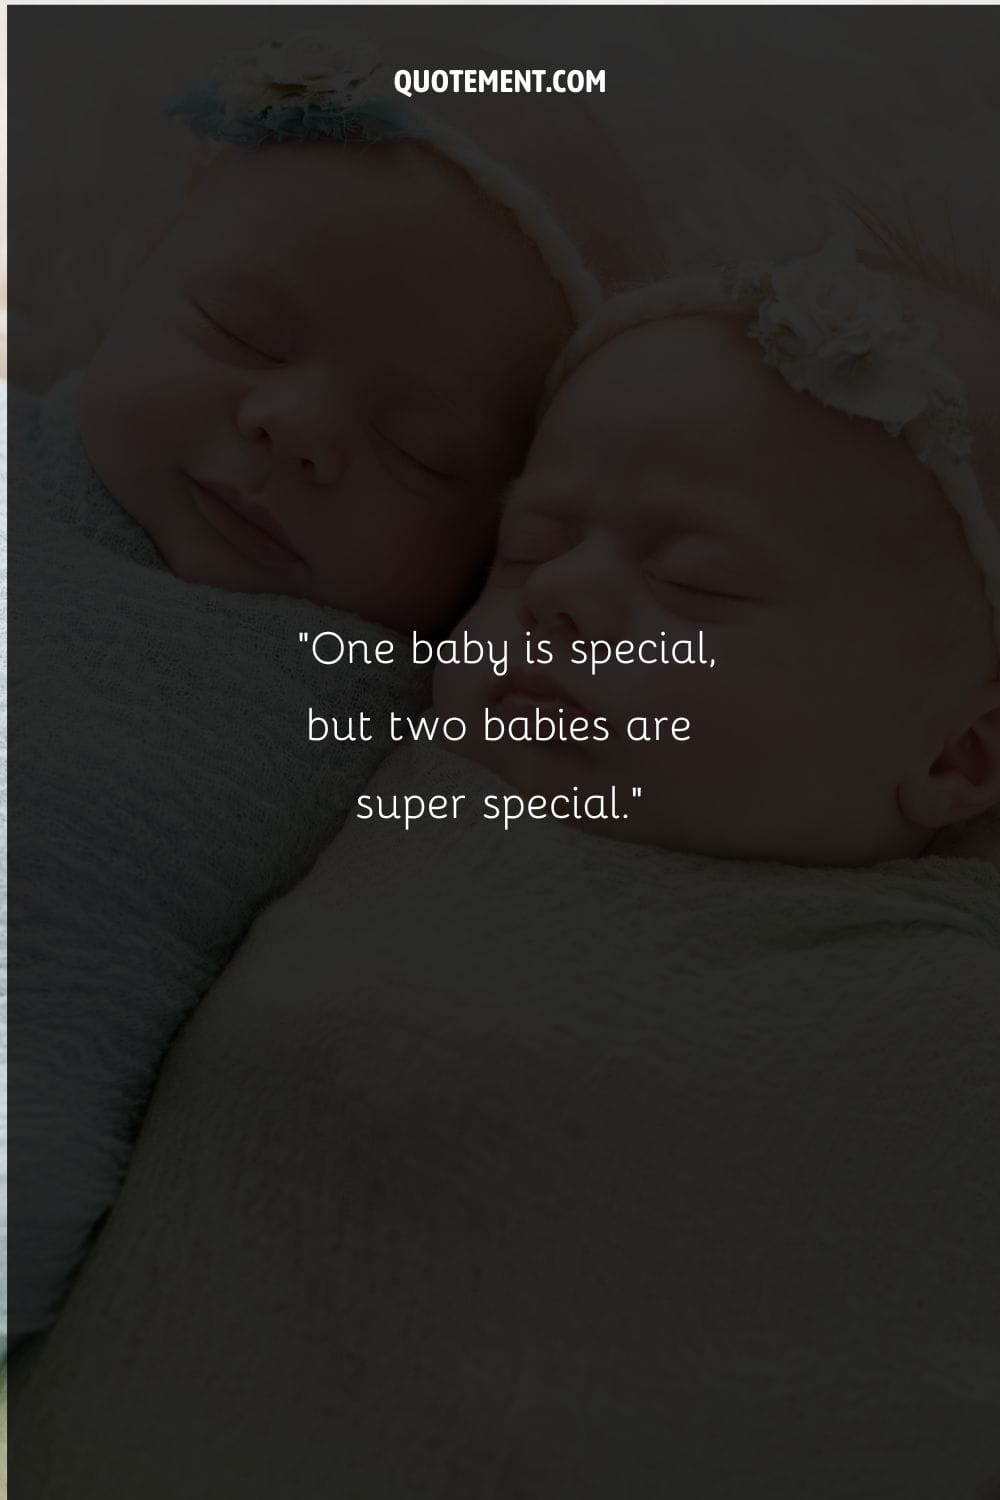 One baby is special, but two babies are super special.